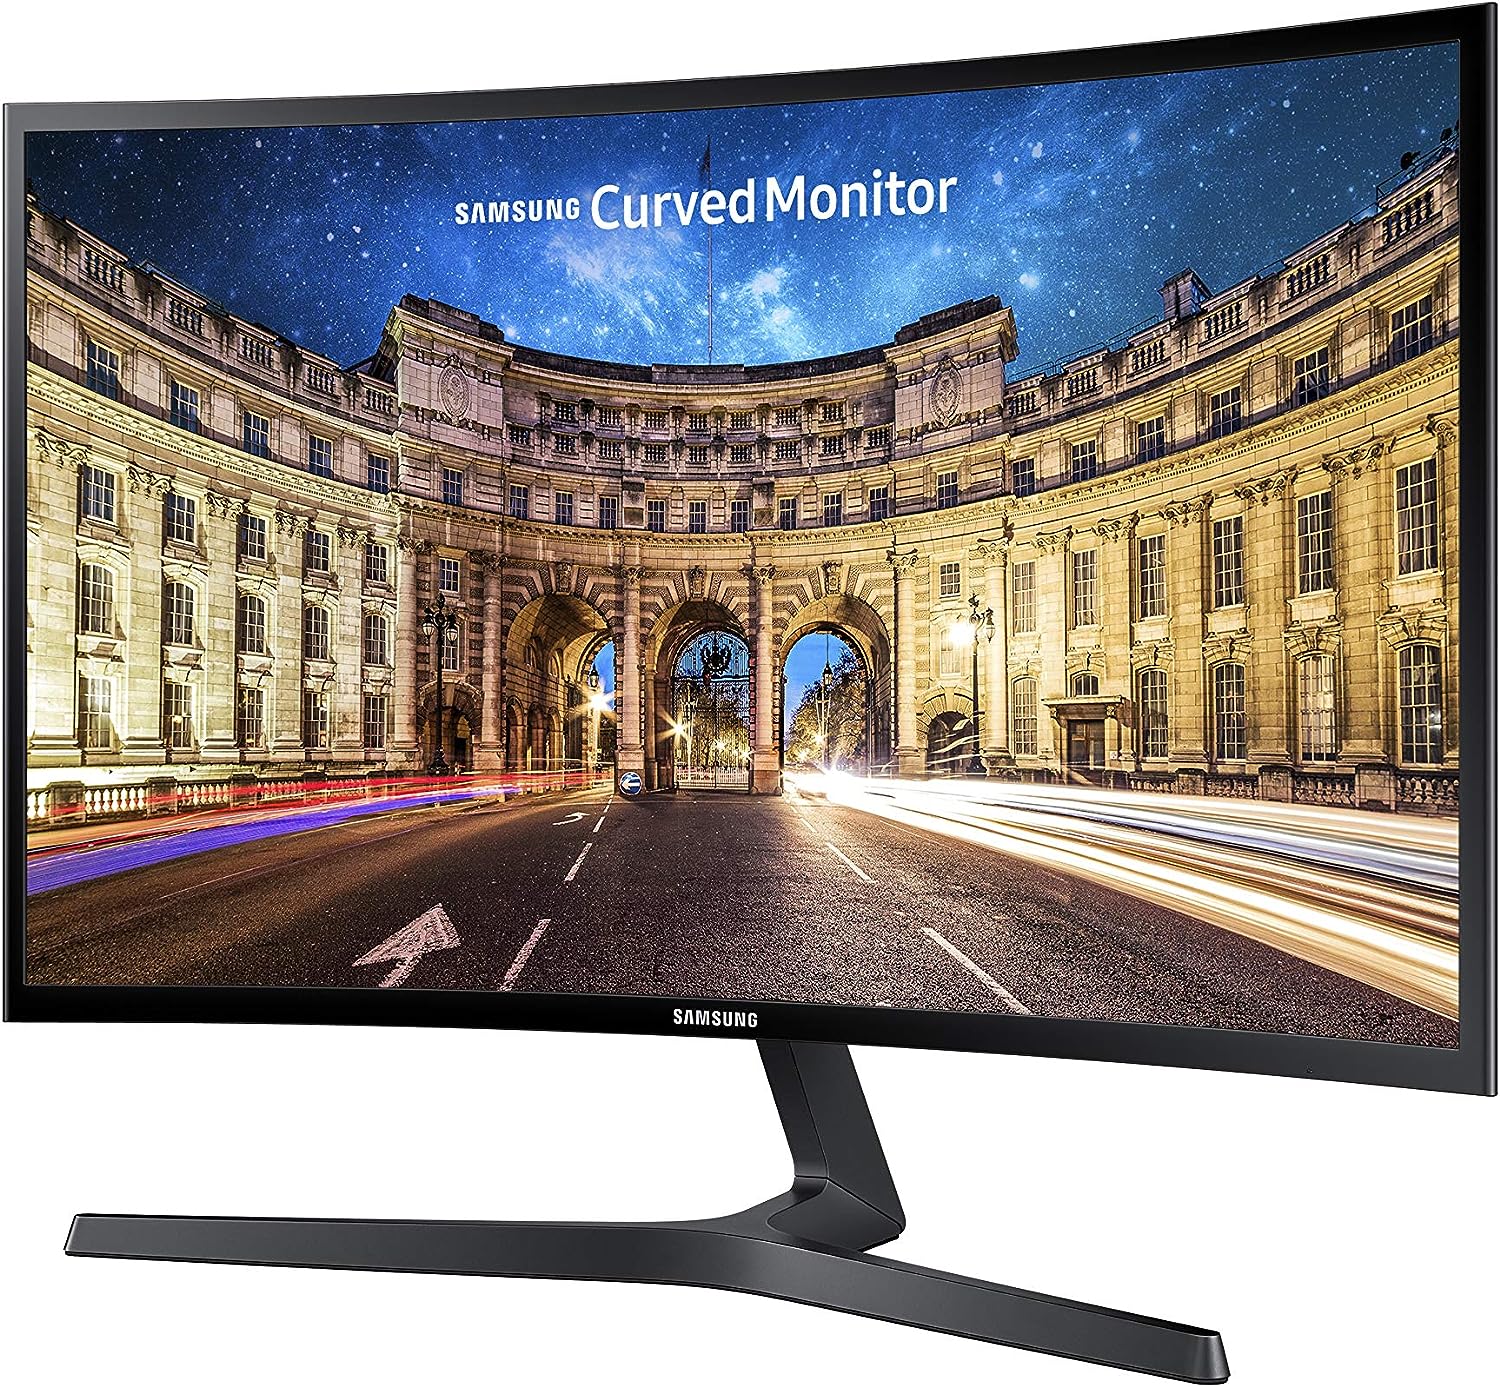 SAMSUNG 23.5” CF396 Curved Computer Monitor Review